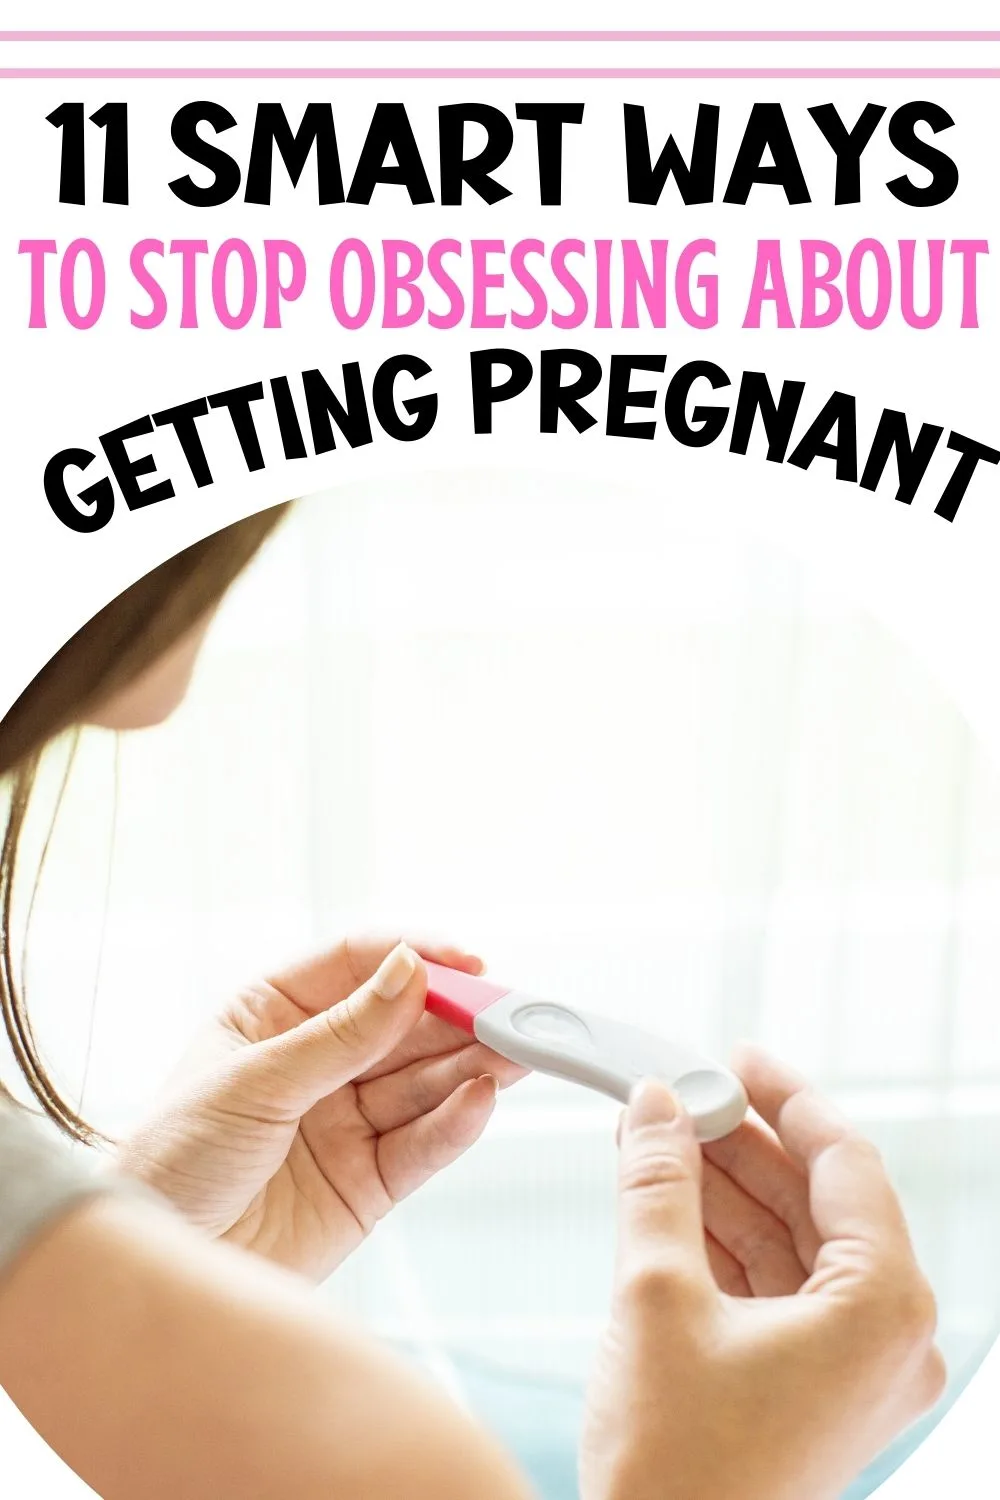 How To Stop Obsessing Over Getting Pregnant